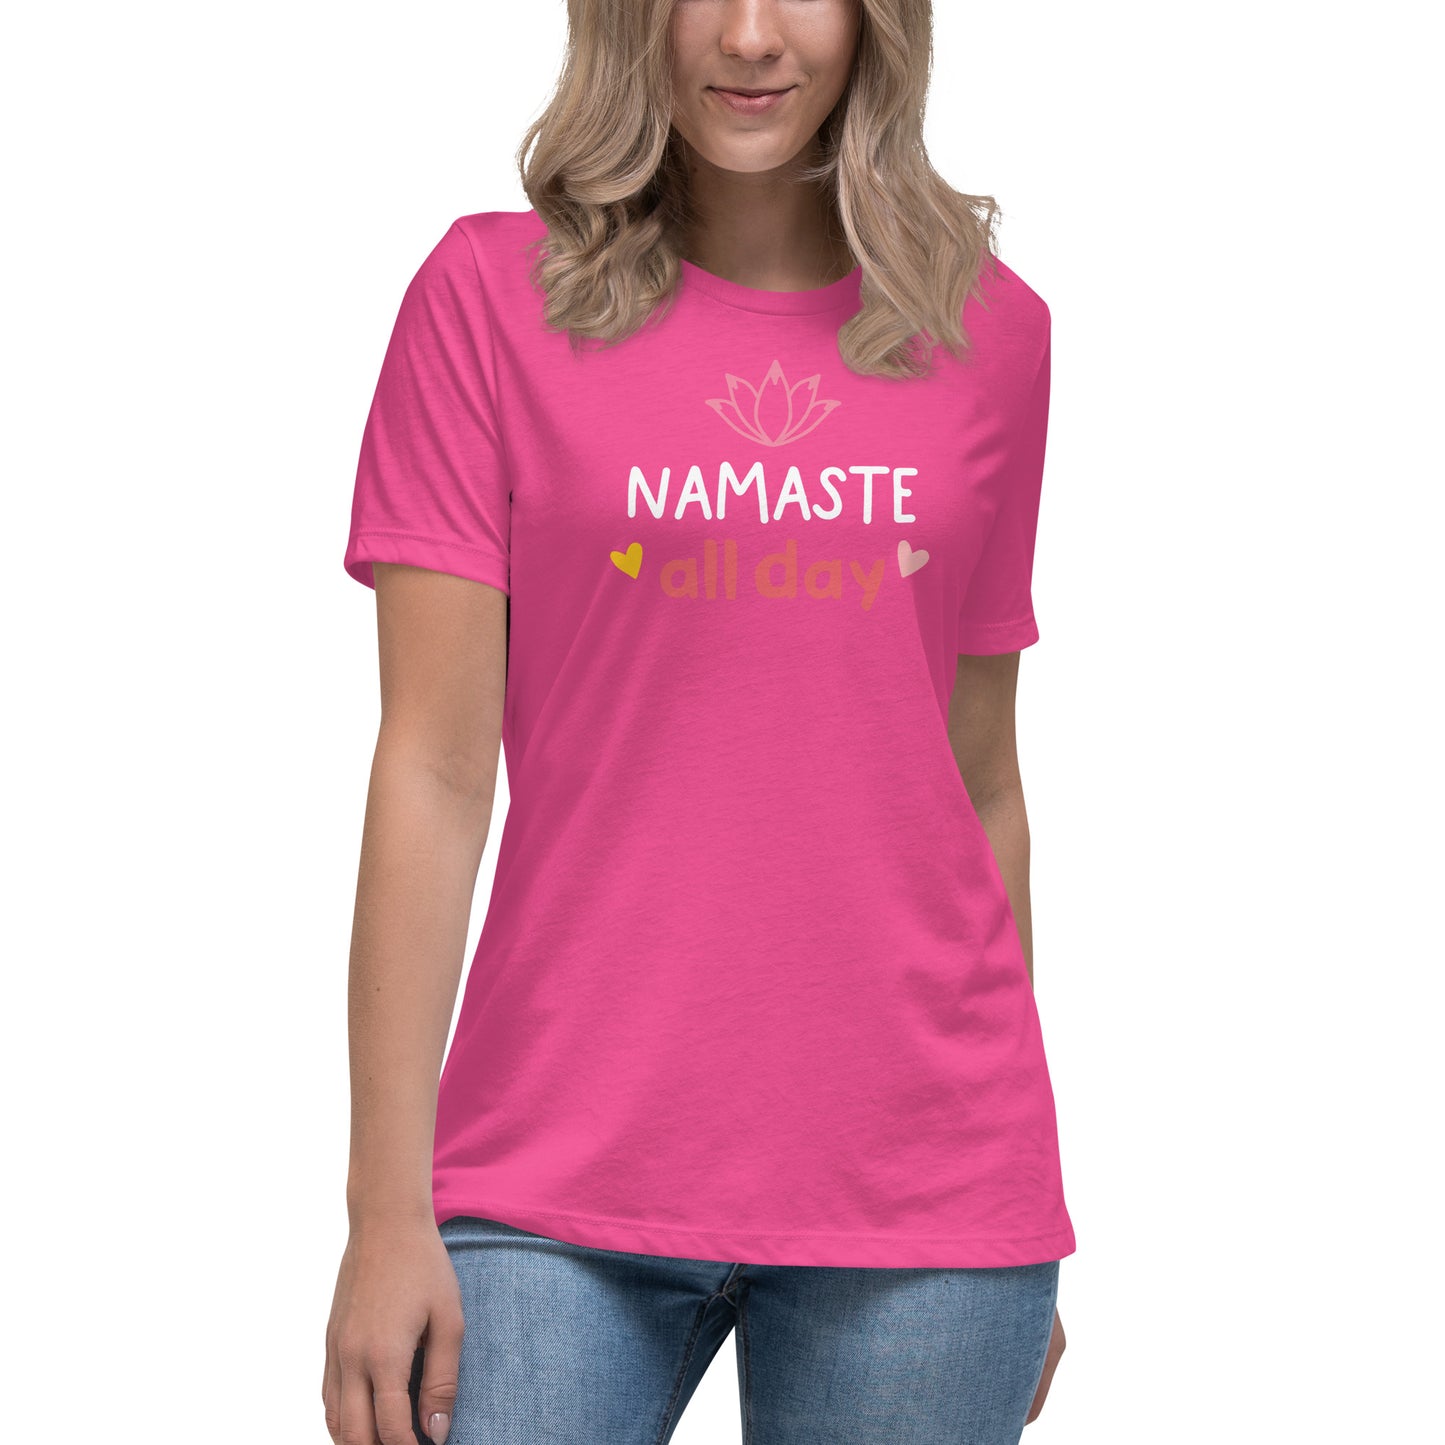 Namaste All Day' Yoga Lover T-Shirt – Perfect for Your Serene Style!